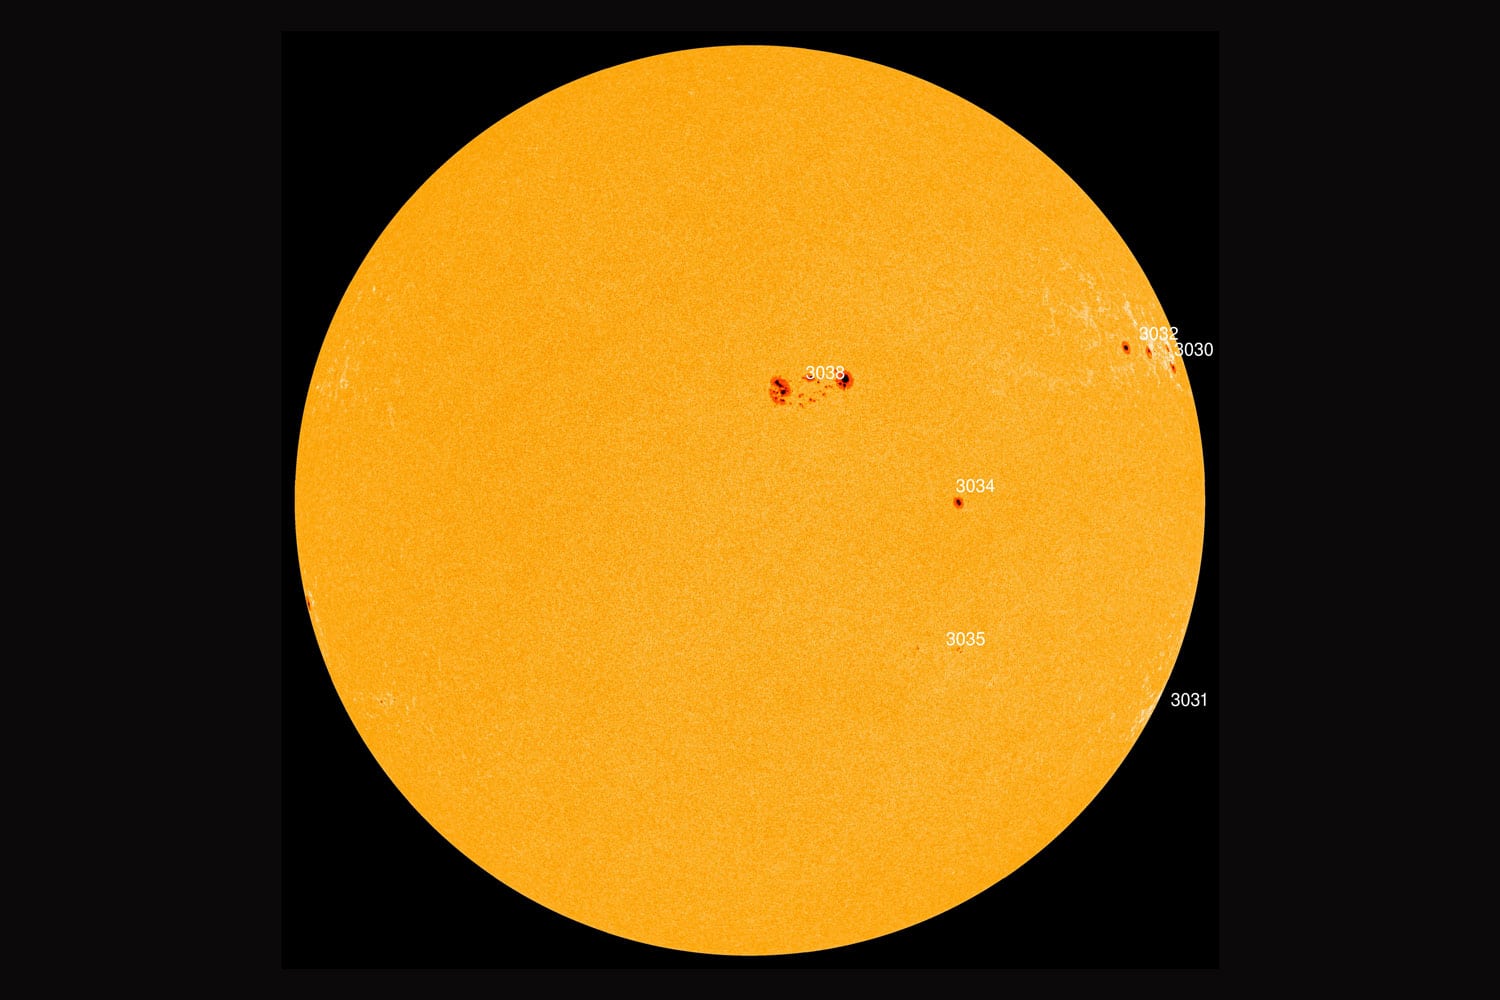 AR3038: A giant sunspot that has doubled in size in only 24 hours thumbnail